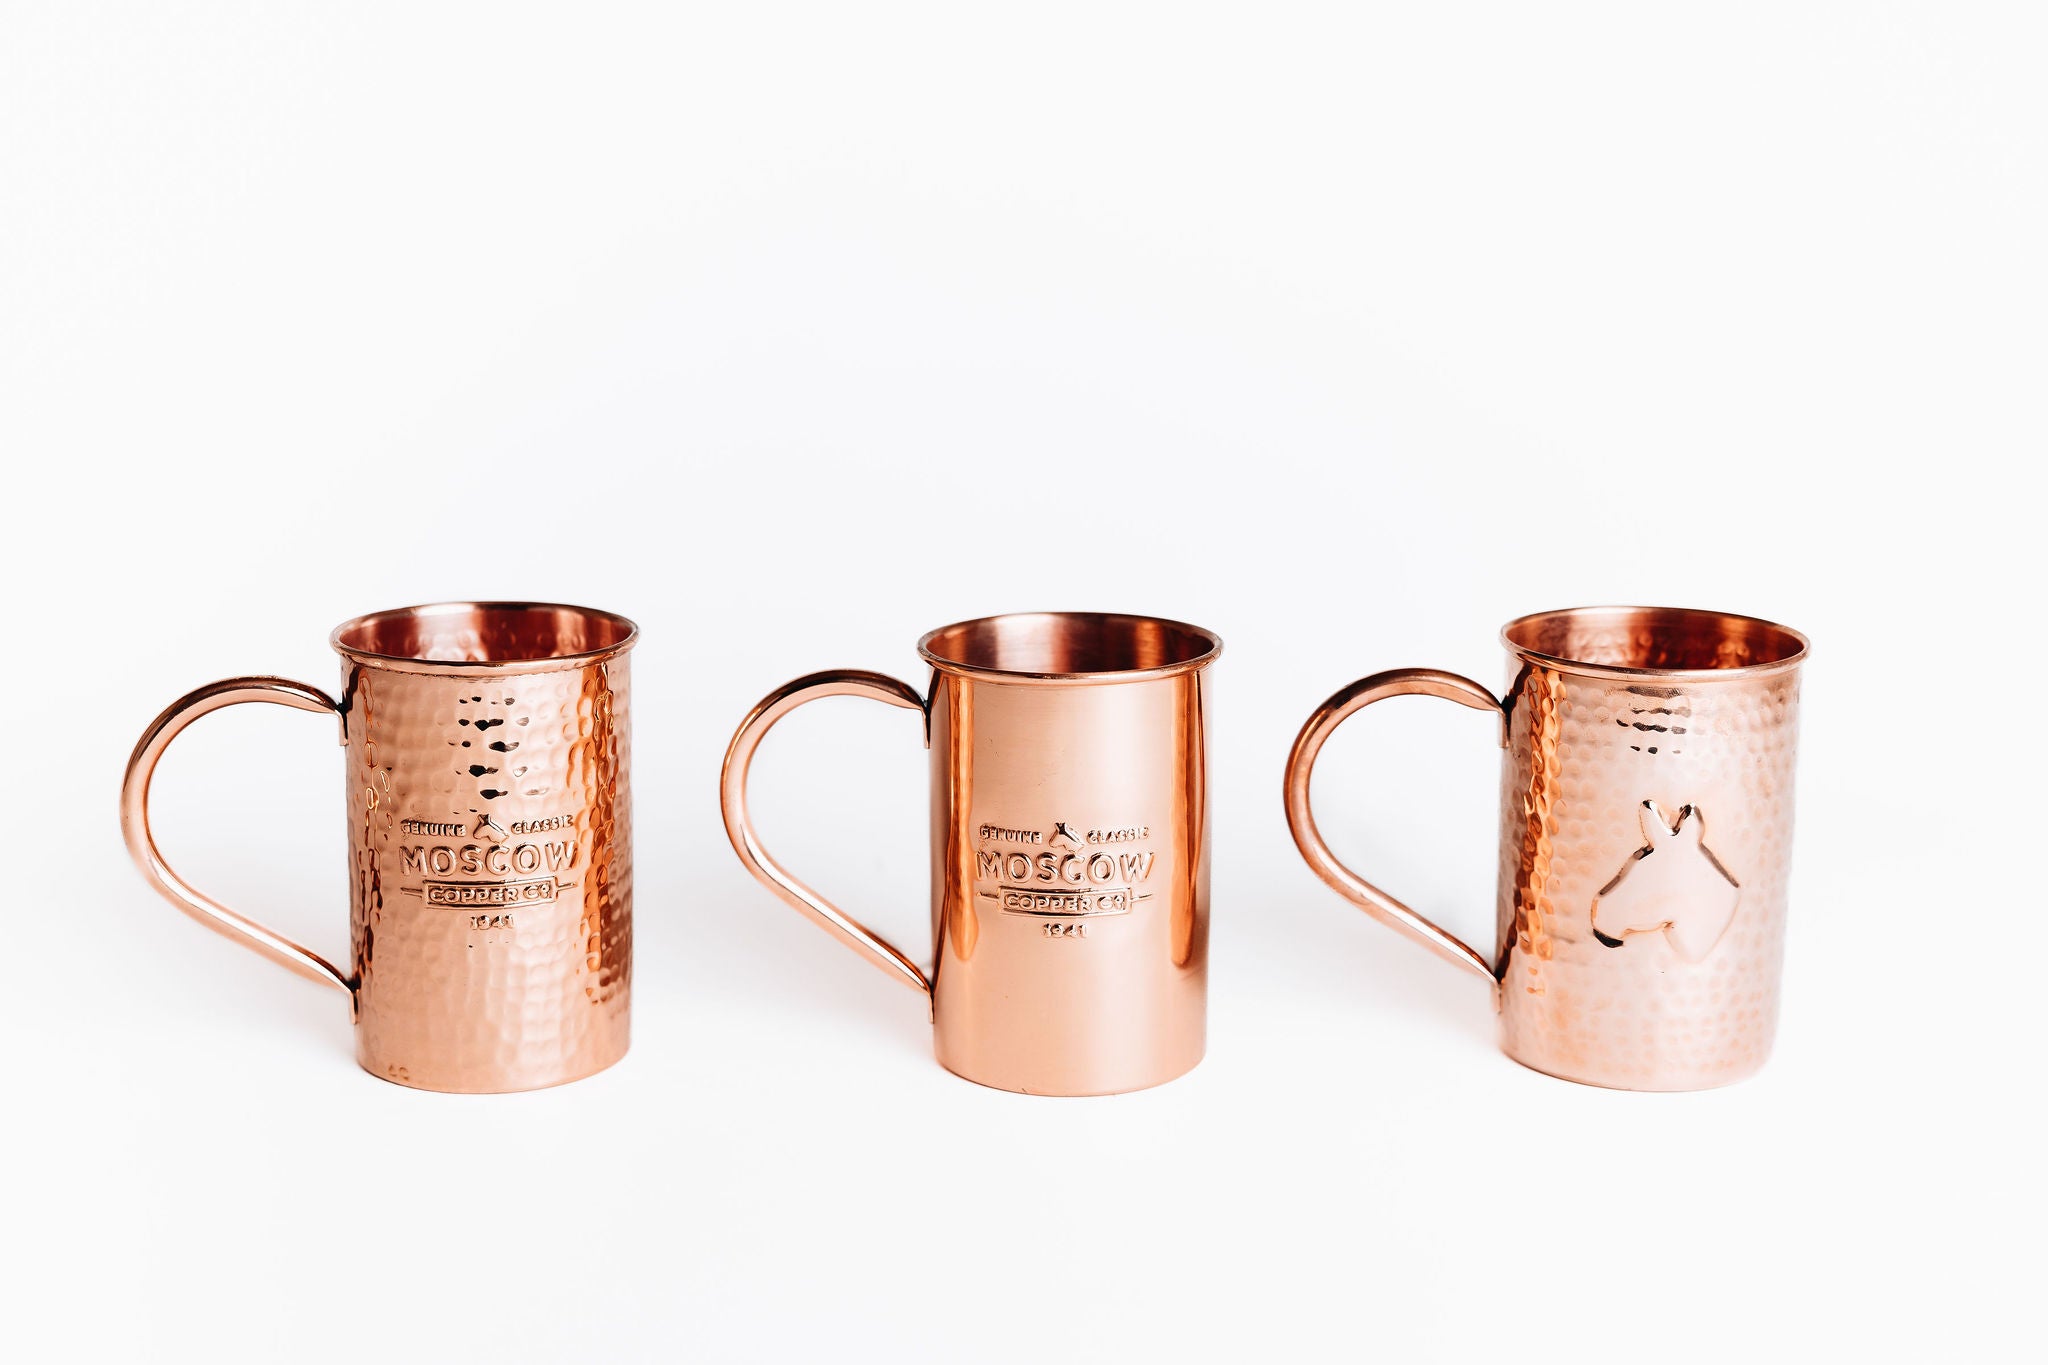 Moscow-Mix Moscow Mule Mugs Large 16 oz - 100% Pure Copper Cups